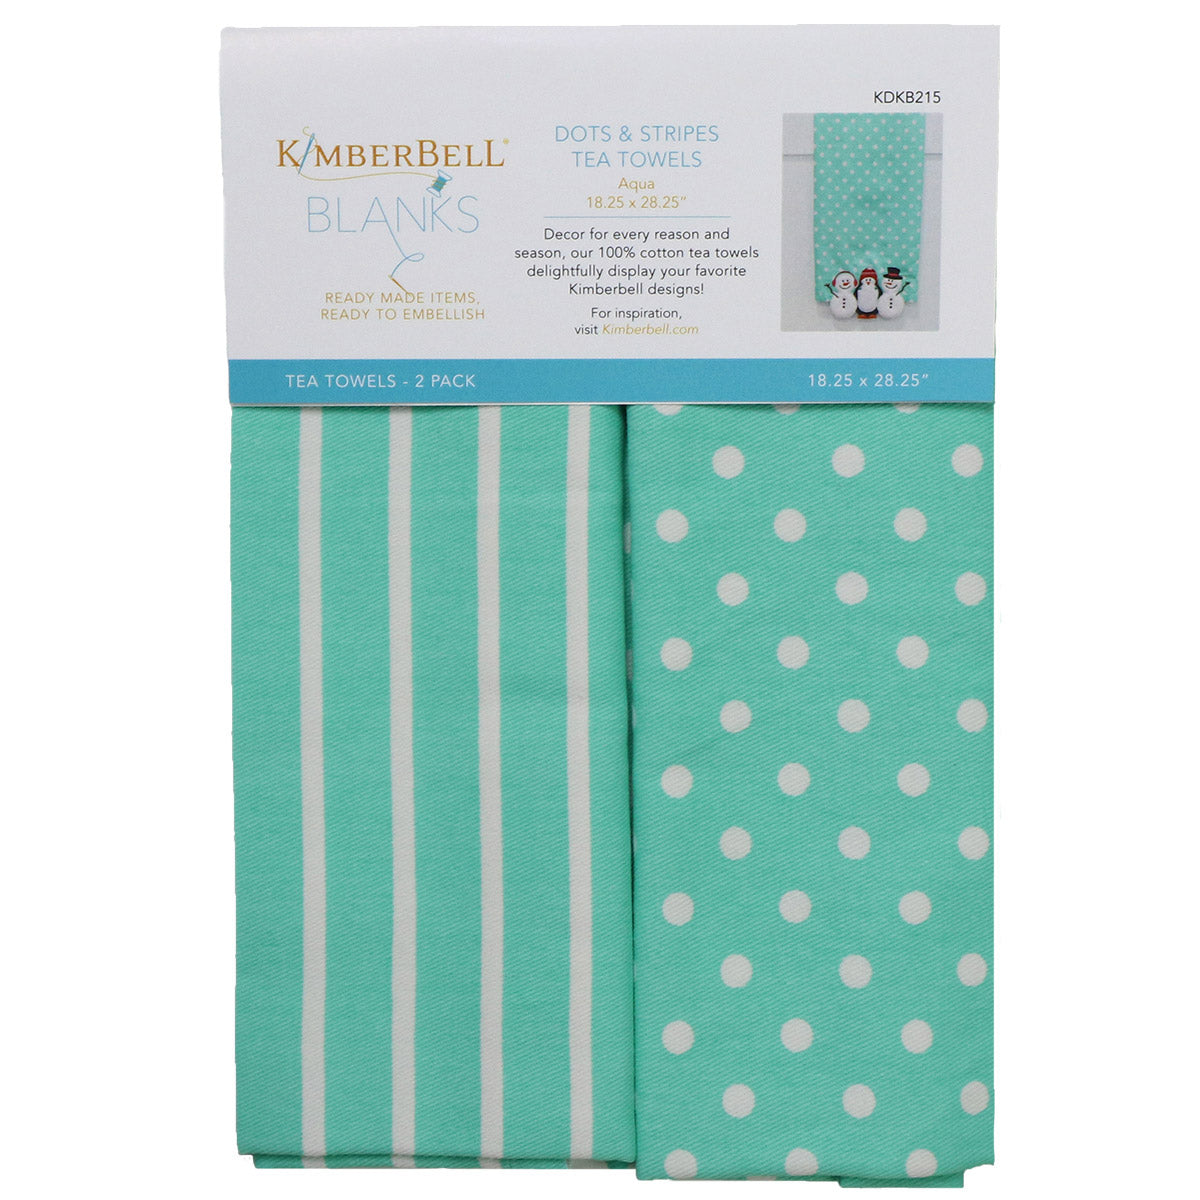 Kimberbell Tea Towels offer the perfect blank to embroider your perfect sentiment. Each package contains 2 towels, one with stripes and one with dots. These 100% cotton towels are available in a variety of colors. Photo shows the towels in Aqua (KDKB215).